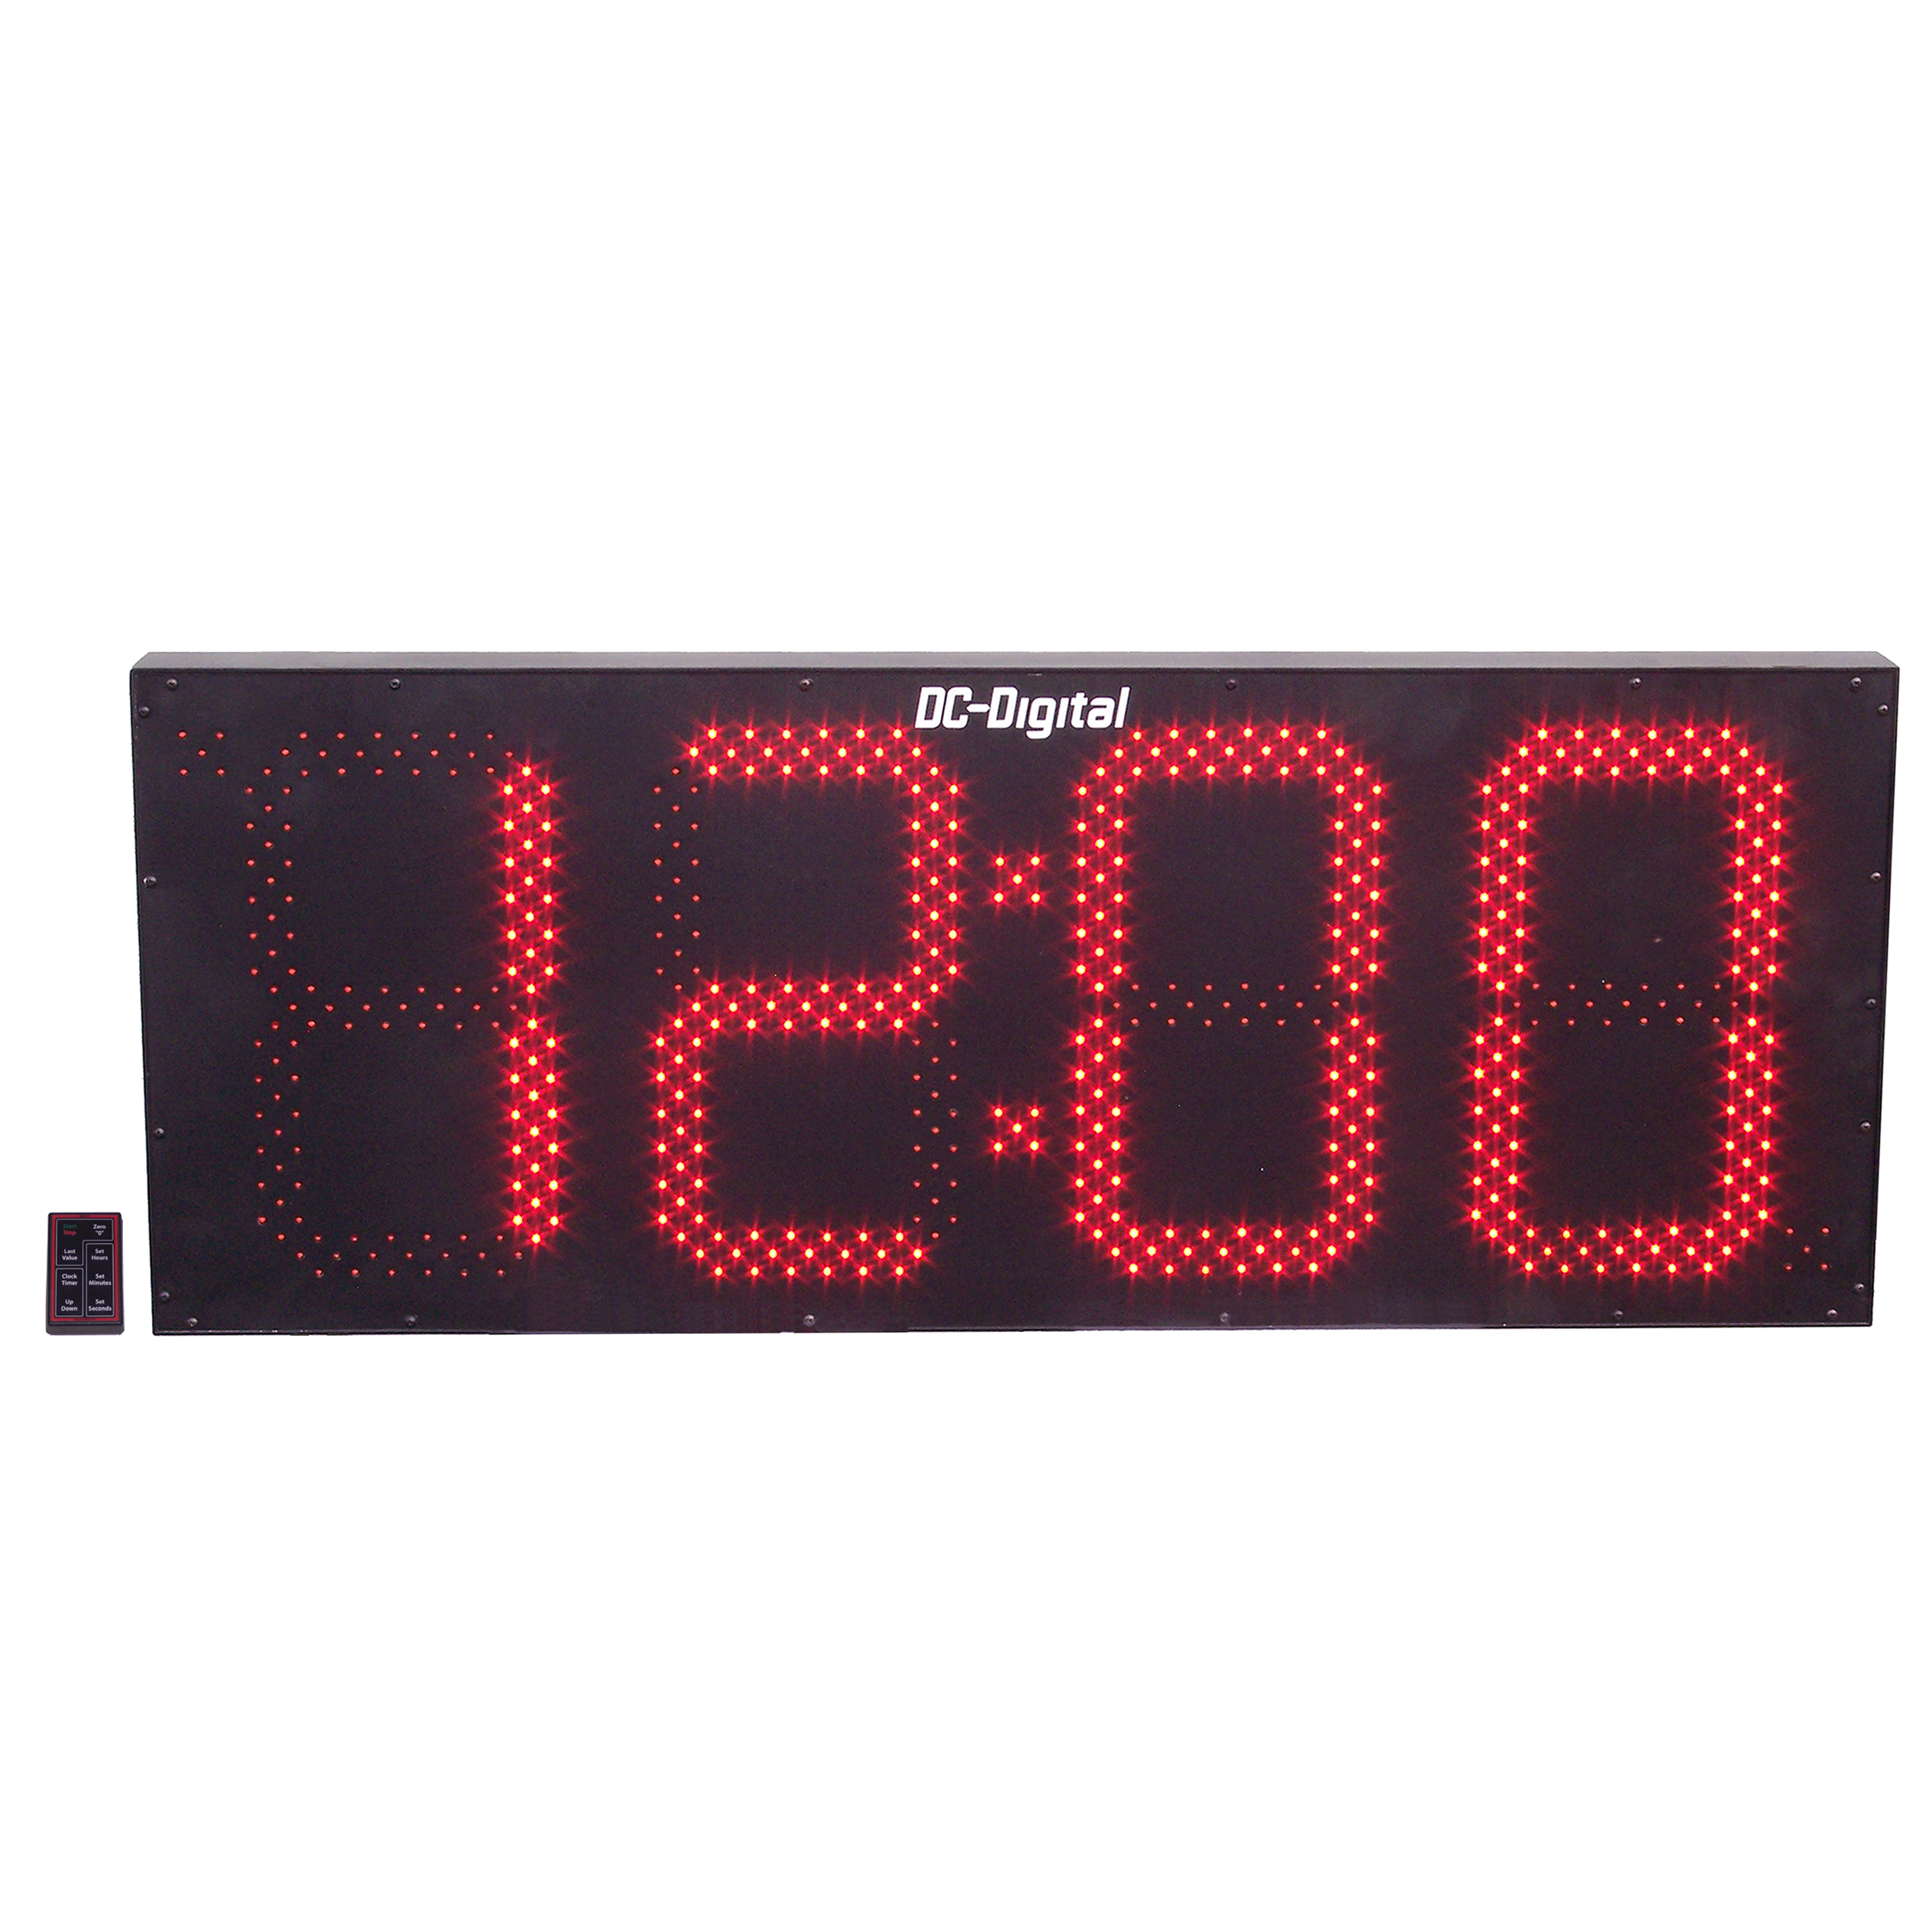 (DC-150UTW-IN) 15.0 Inch LED Digital, Wireless Handheld Controlled, Count Up timer, Countdown Timer, Time of Day Clock (INDOOR)